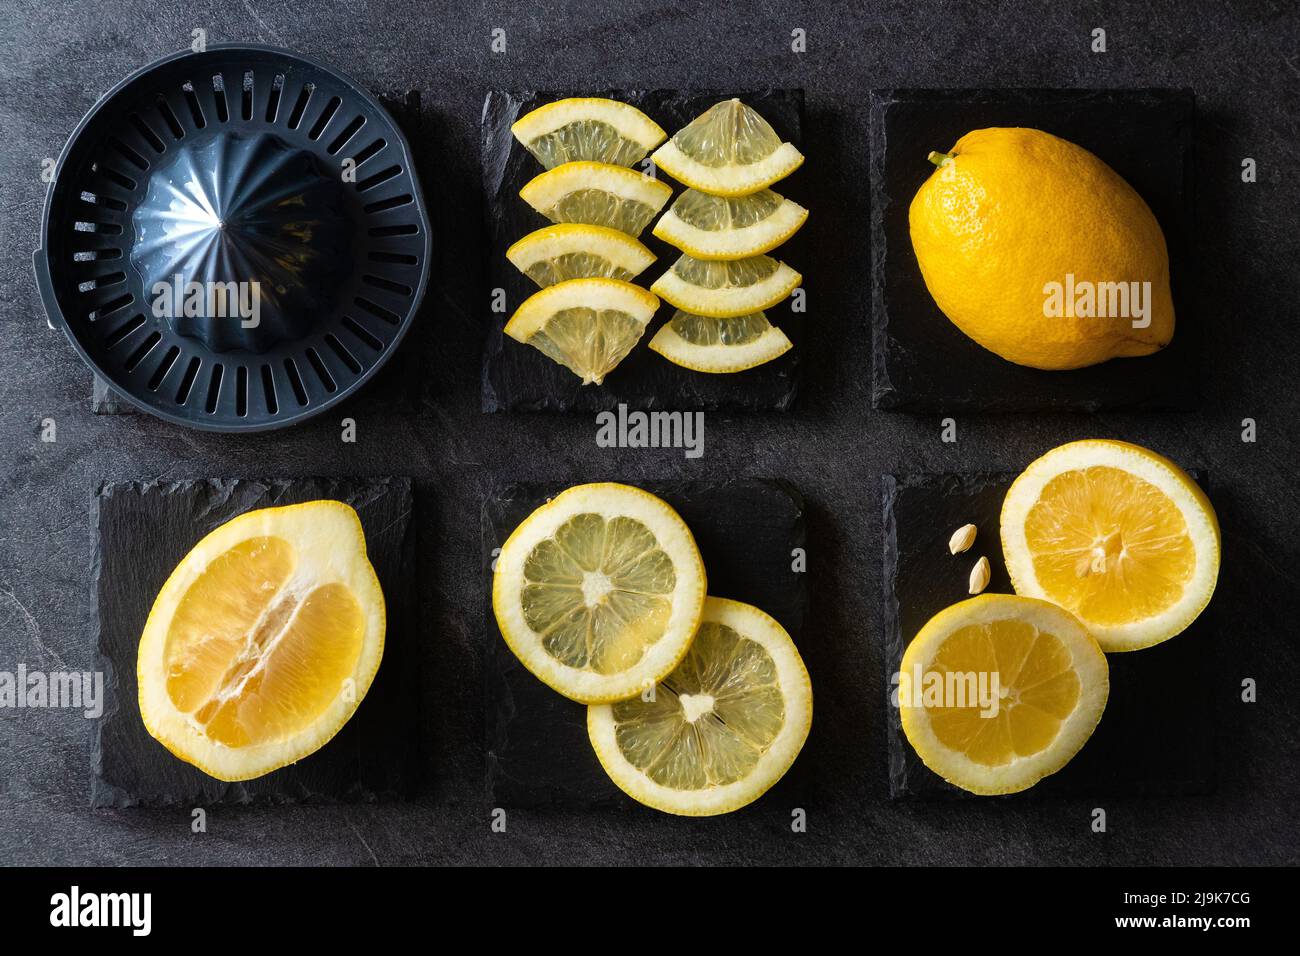 Elegant background design of lemons and lemon slices with squeezer and knife on dark or black cement or stone surface. Stock Photo